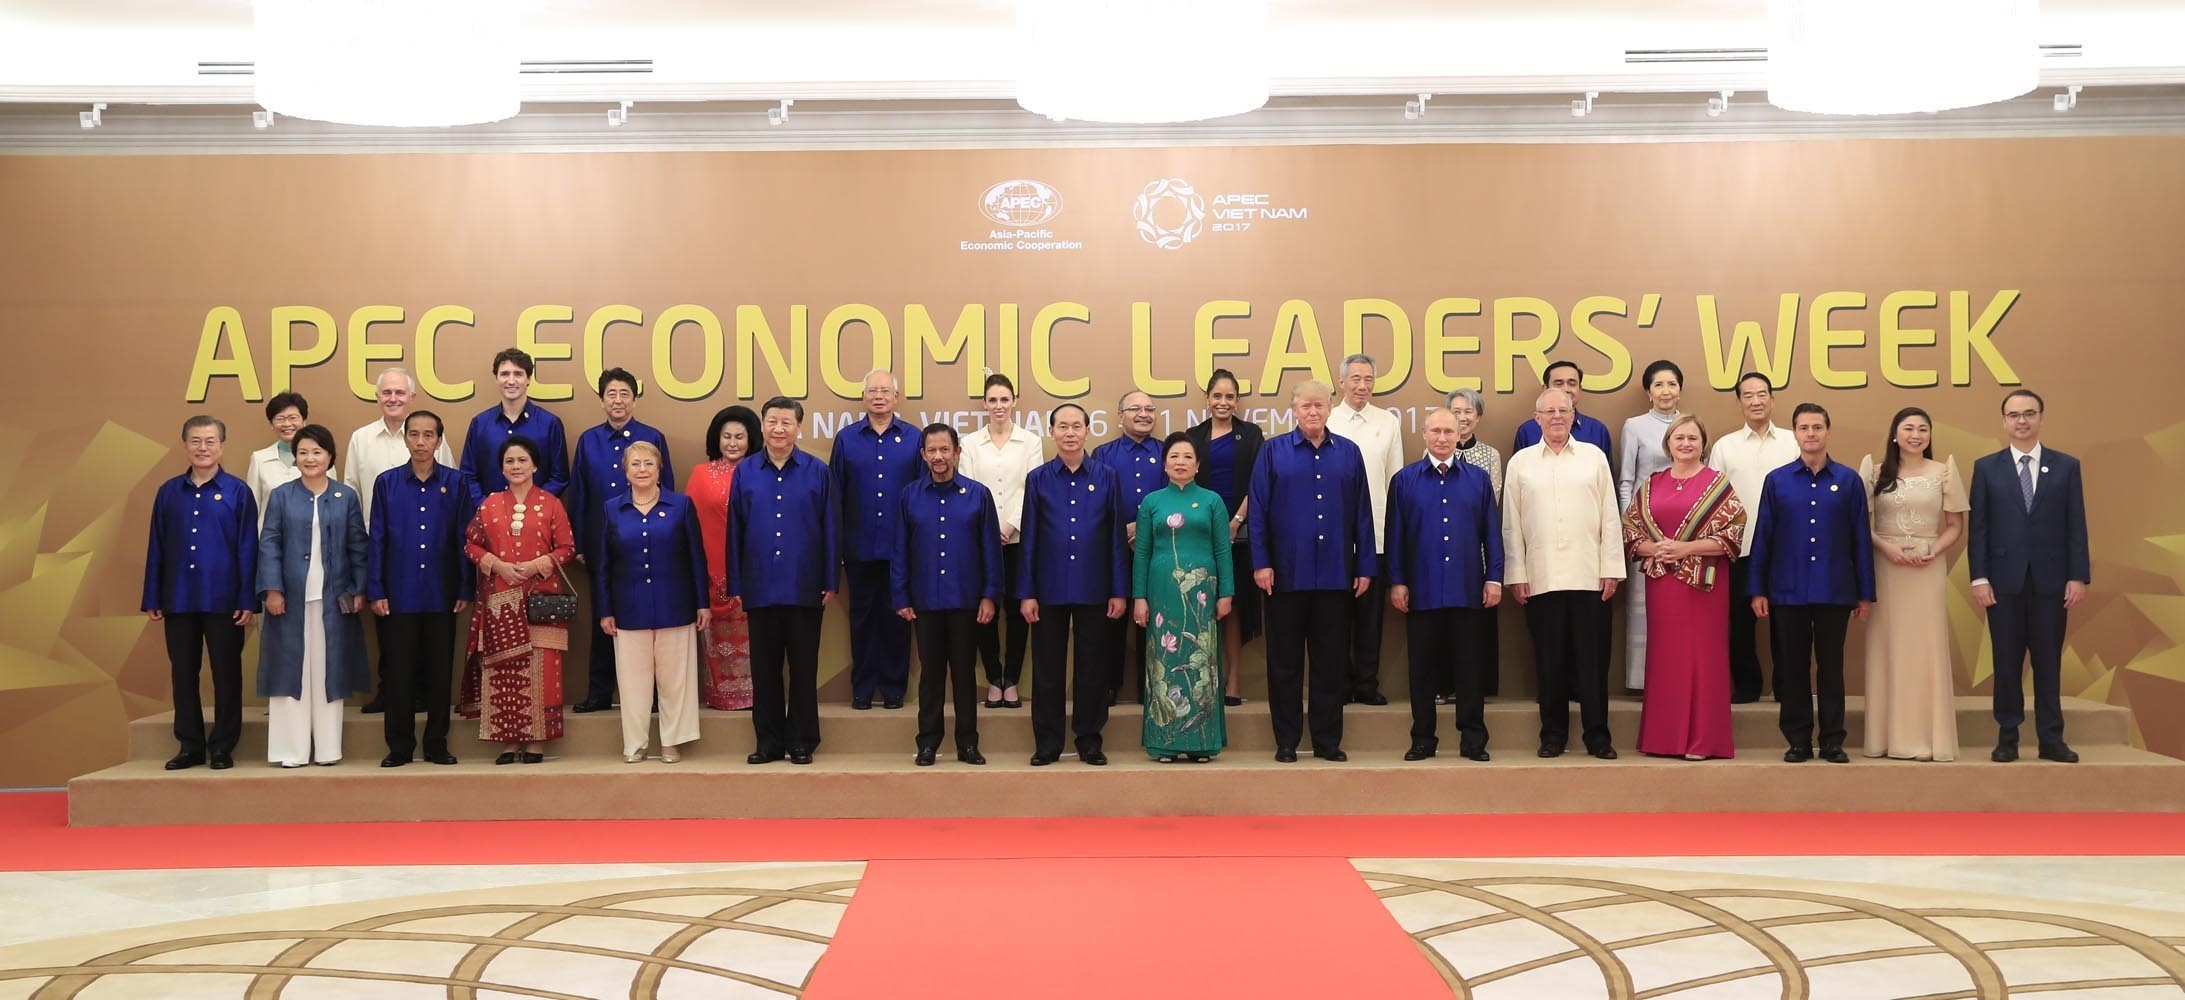 President Quang, his wife, and other APEC leaders and their spouses posing for a group photo